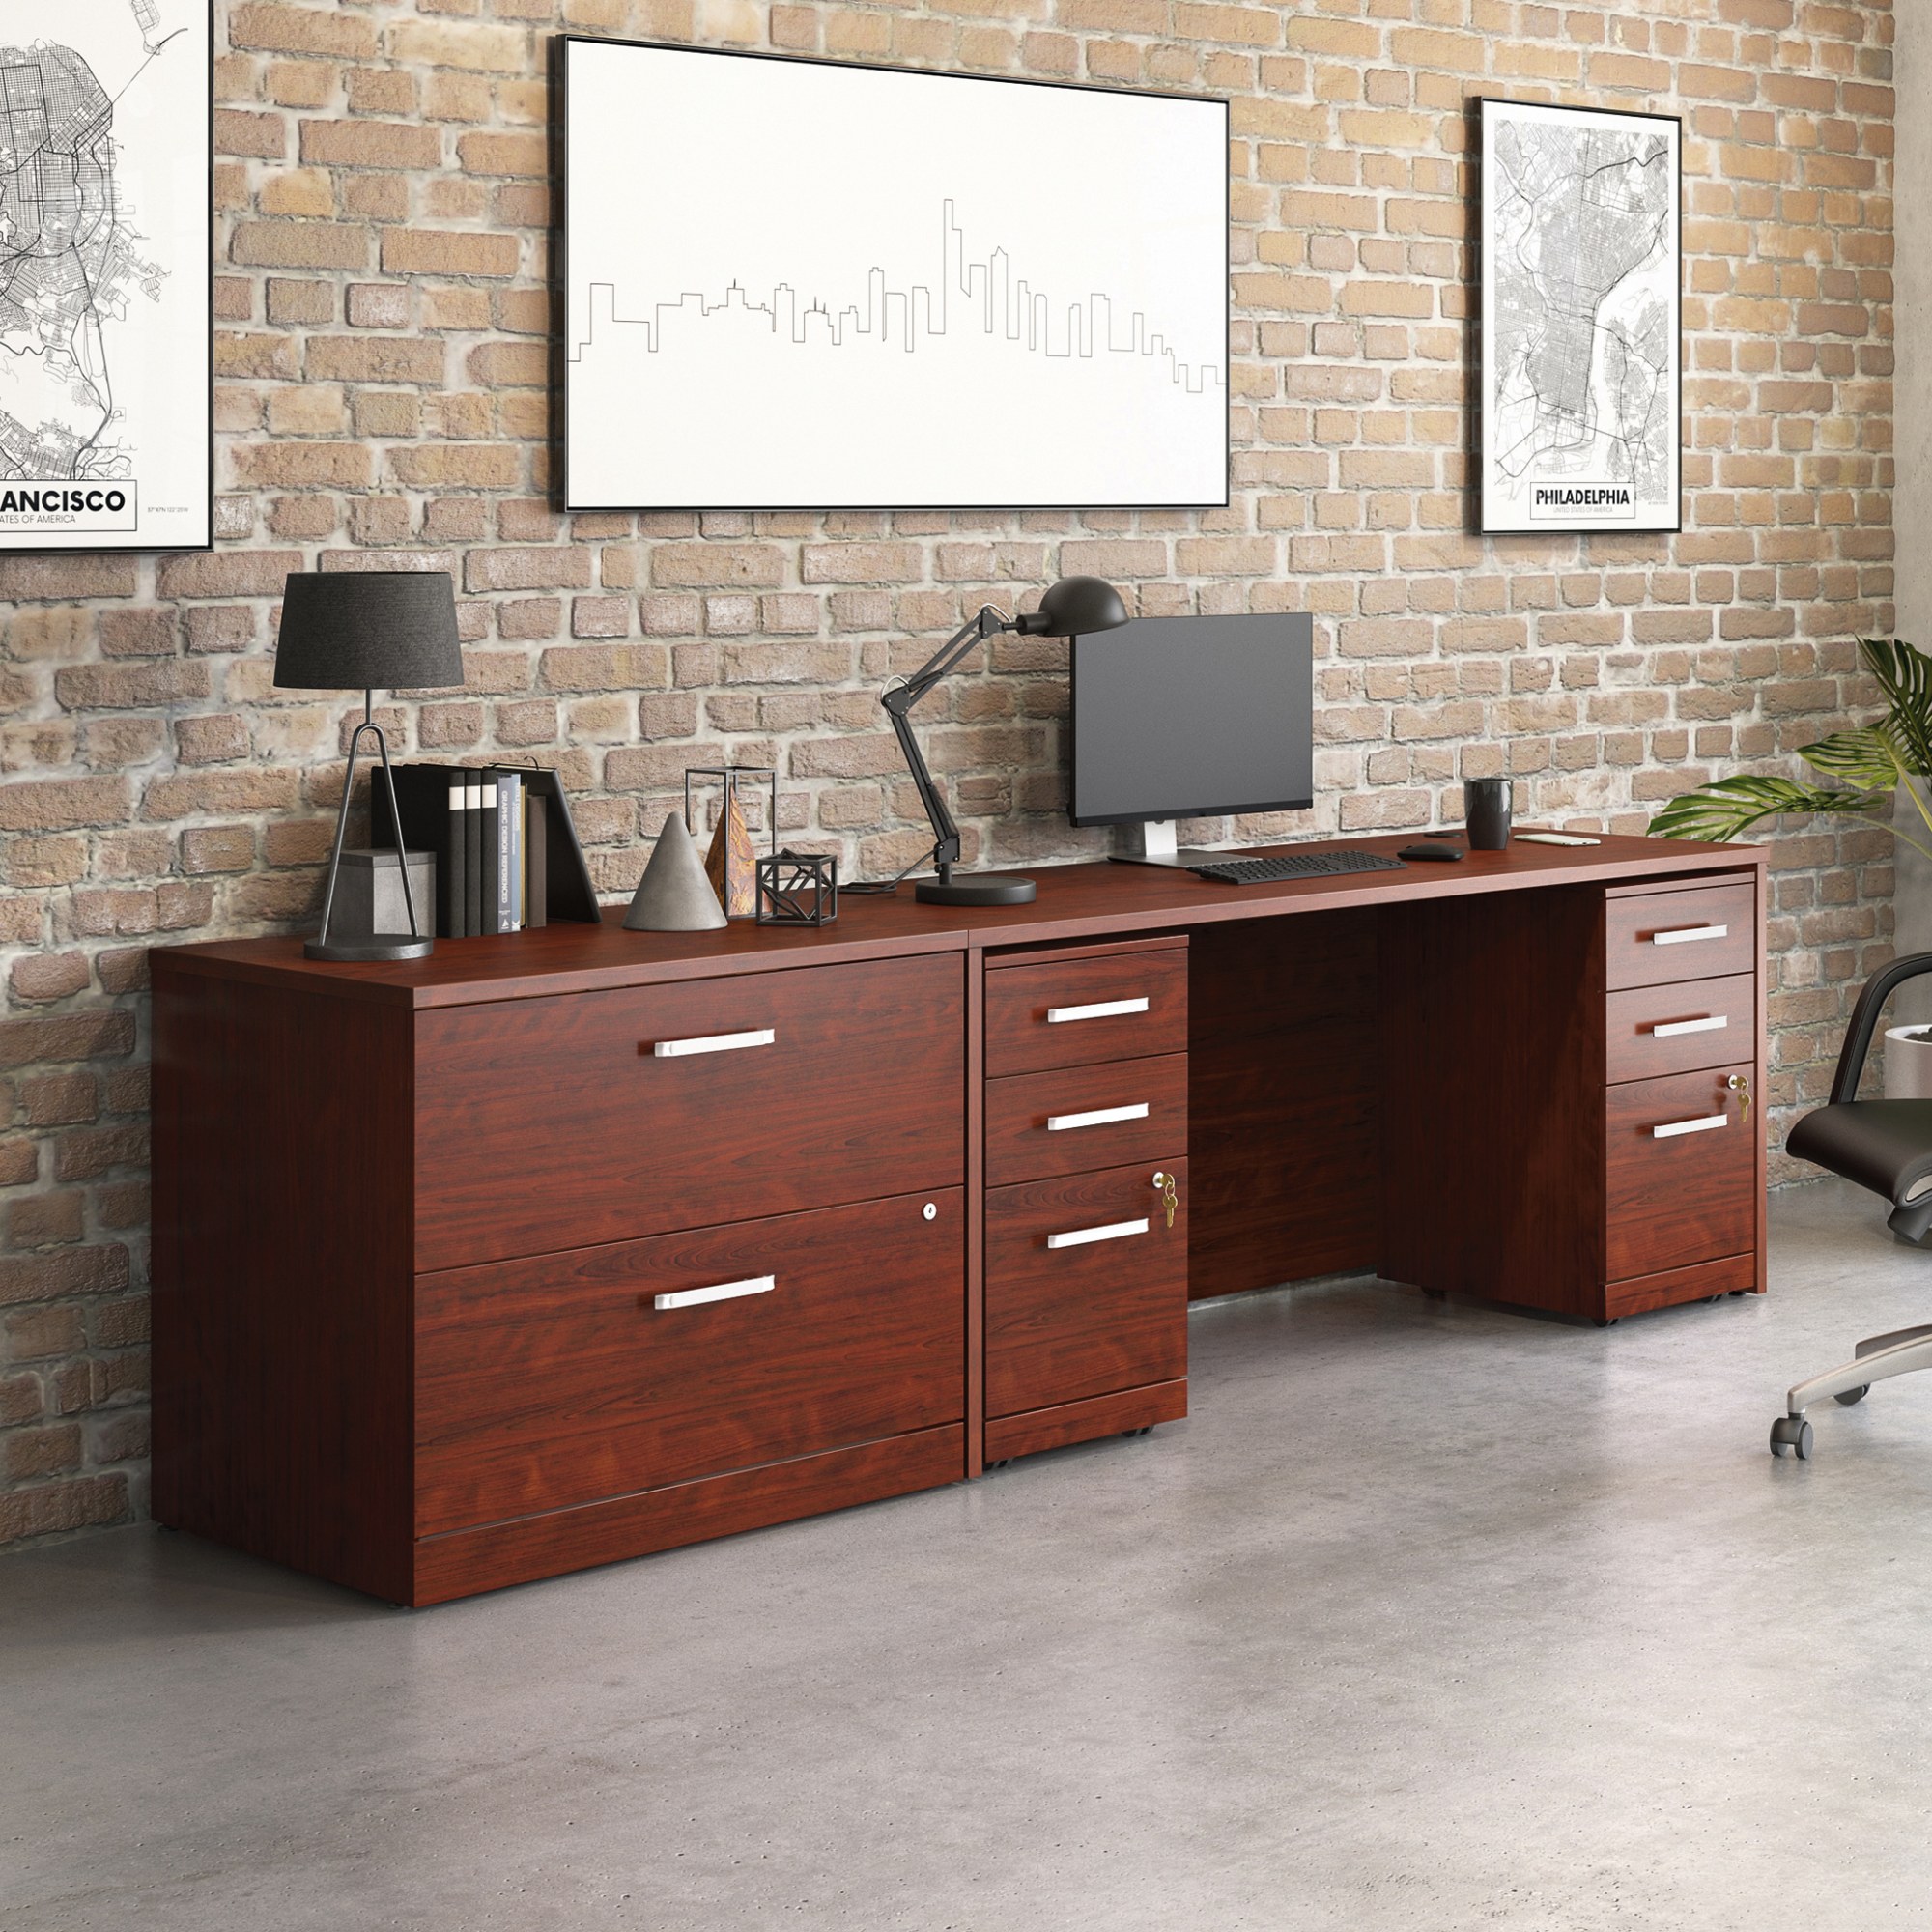 Sauder Affirm 72" x 24" Desk Shell/Lateral File/Two 3-Drawer Mobile Files Cherry - image 3 of 8